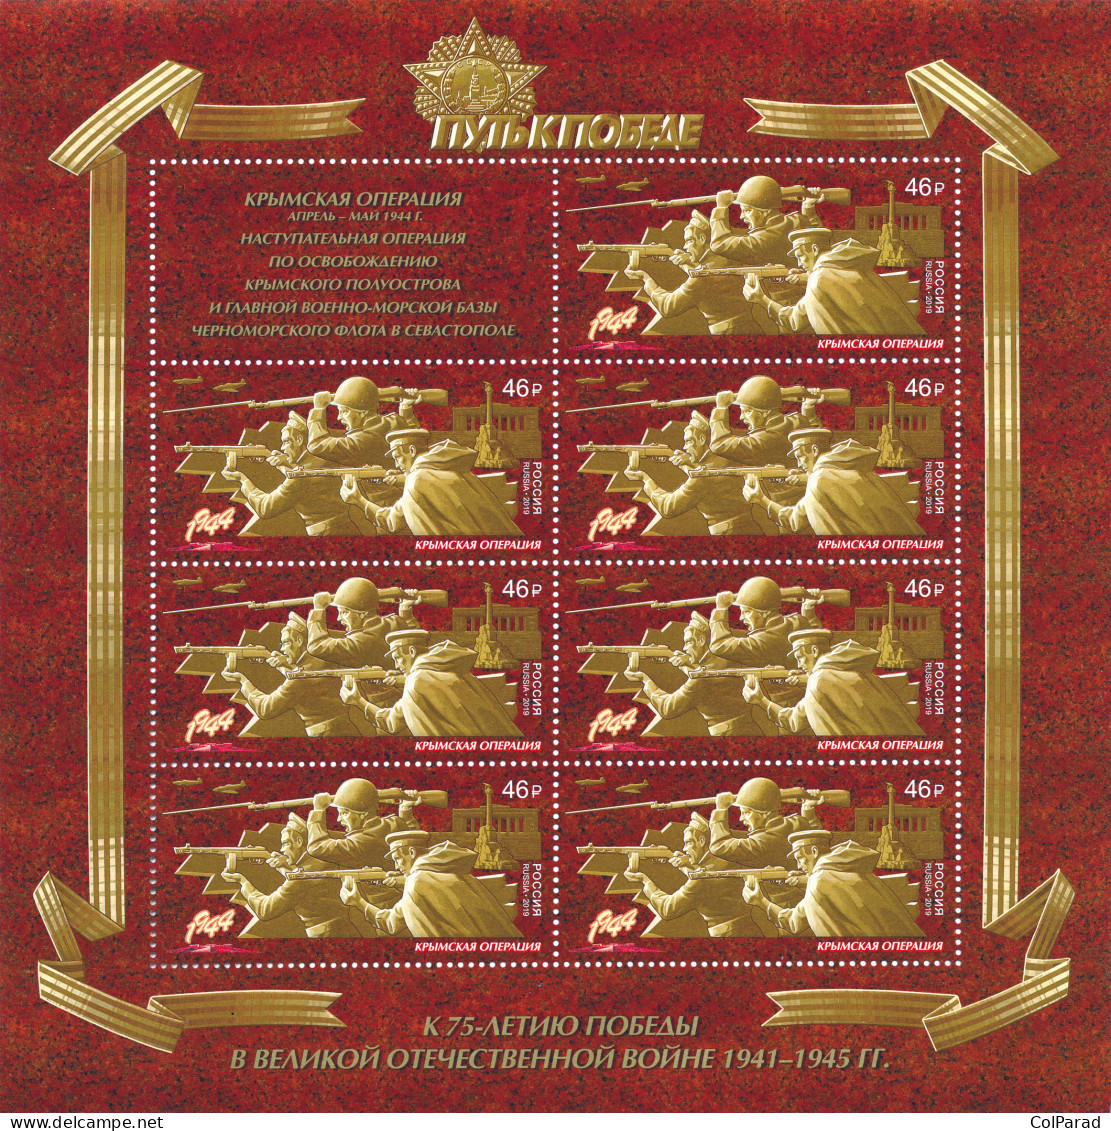 RUSSIA - 2019 - MINIATURE SHEET MNH ** - Way To The Victory. Crimean Offensive - Ungebraucht